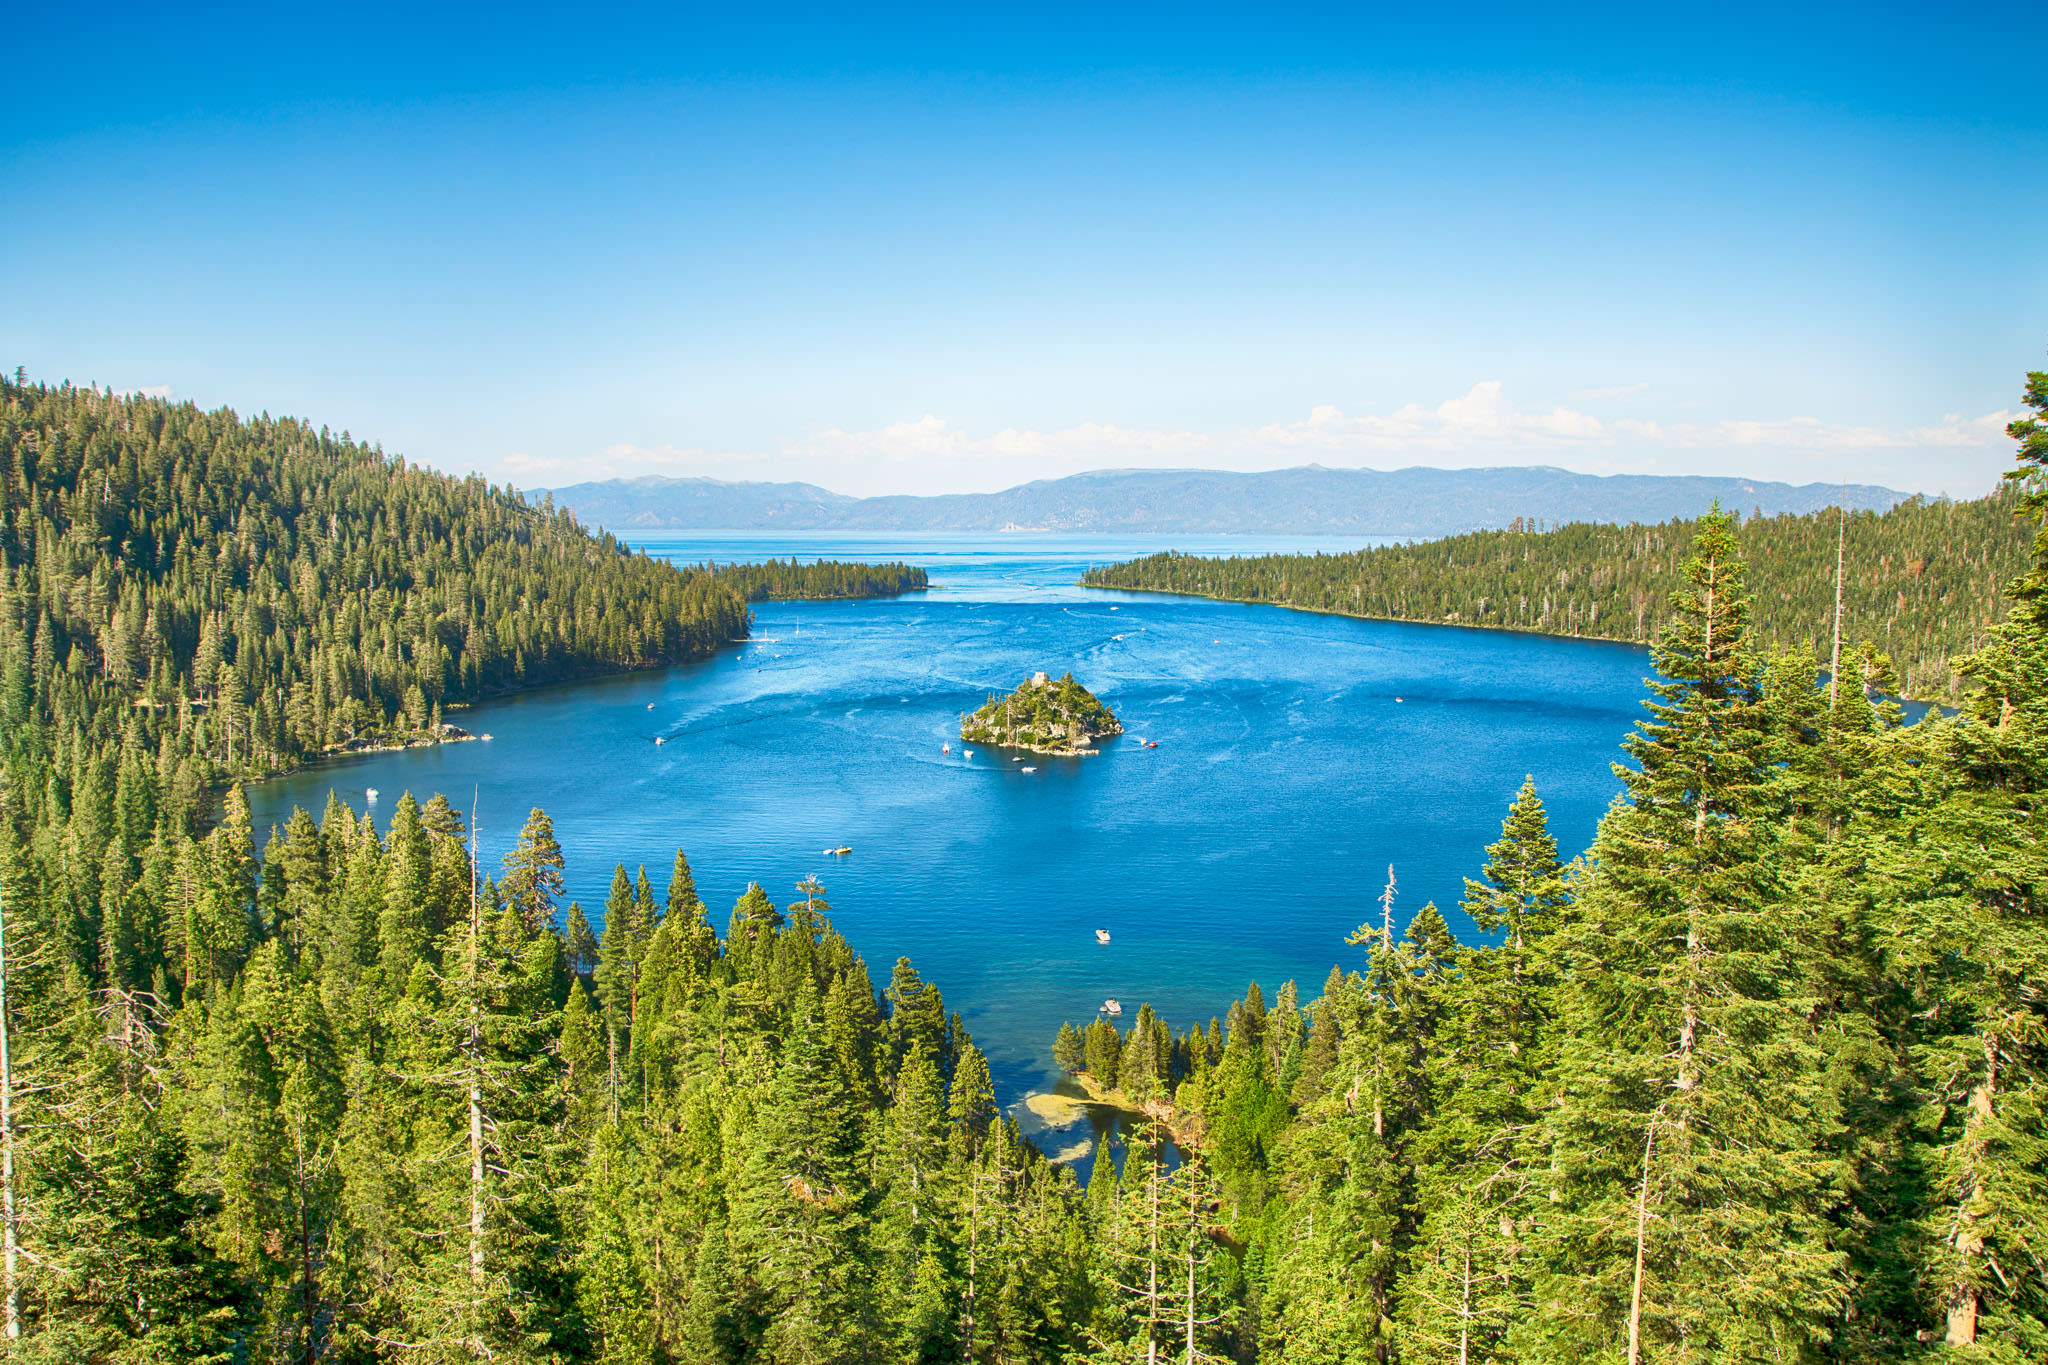 Annual report card shows decline in clarity for Lake Tahoe